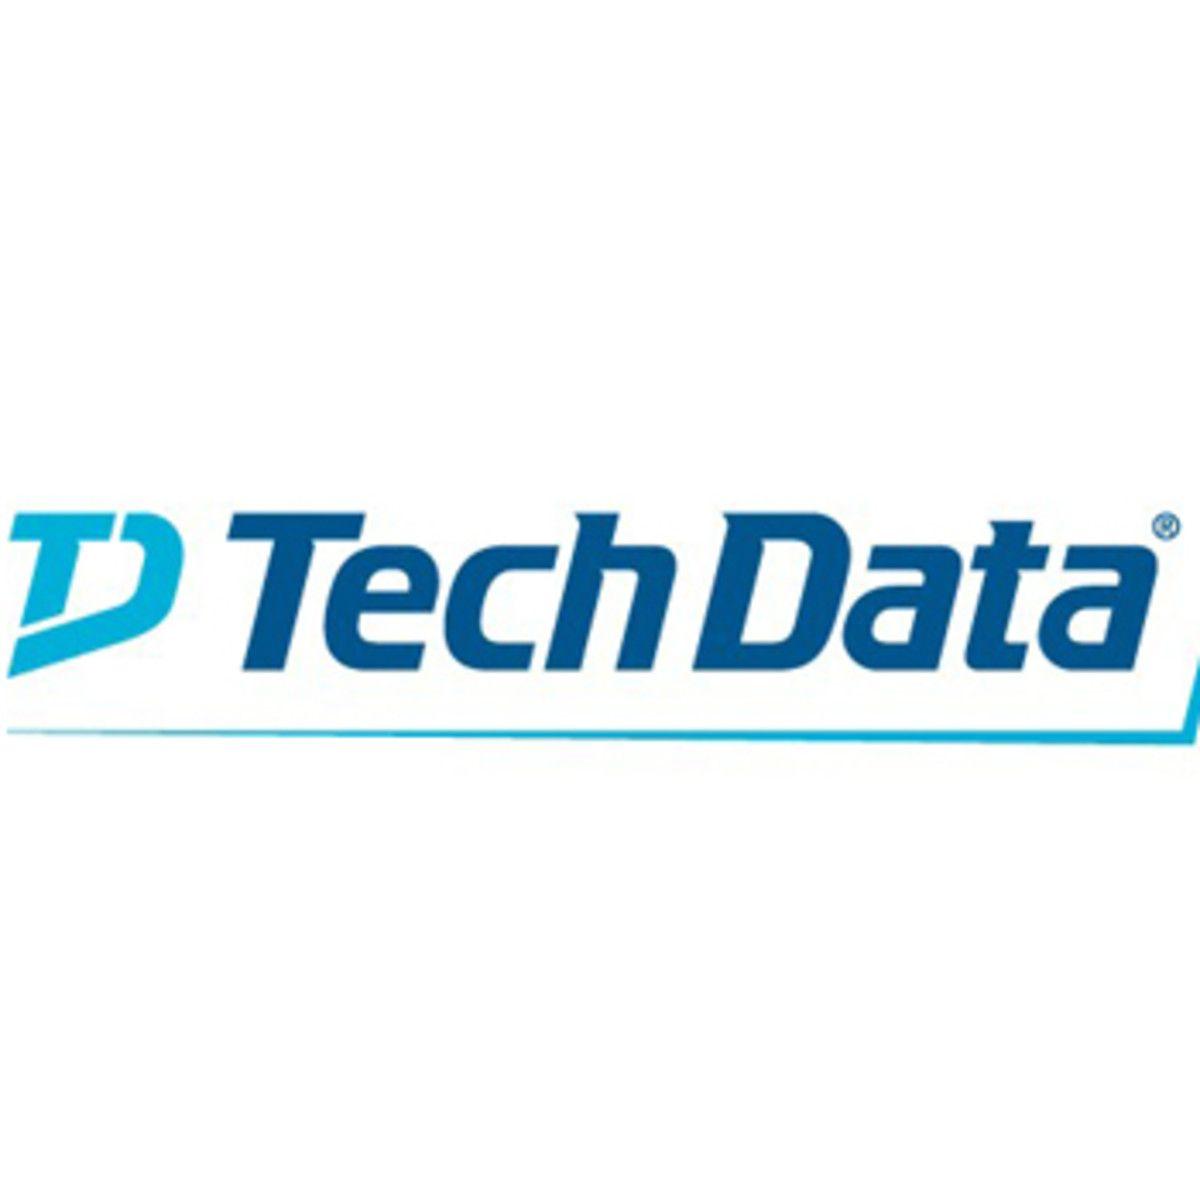 Parallels Logo - Tech Data's Parallels partnership to help resellers grow Workspace